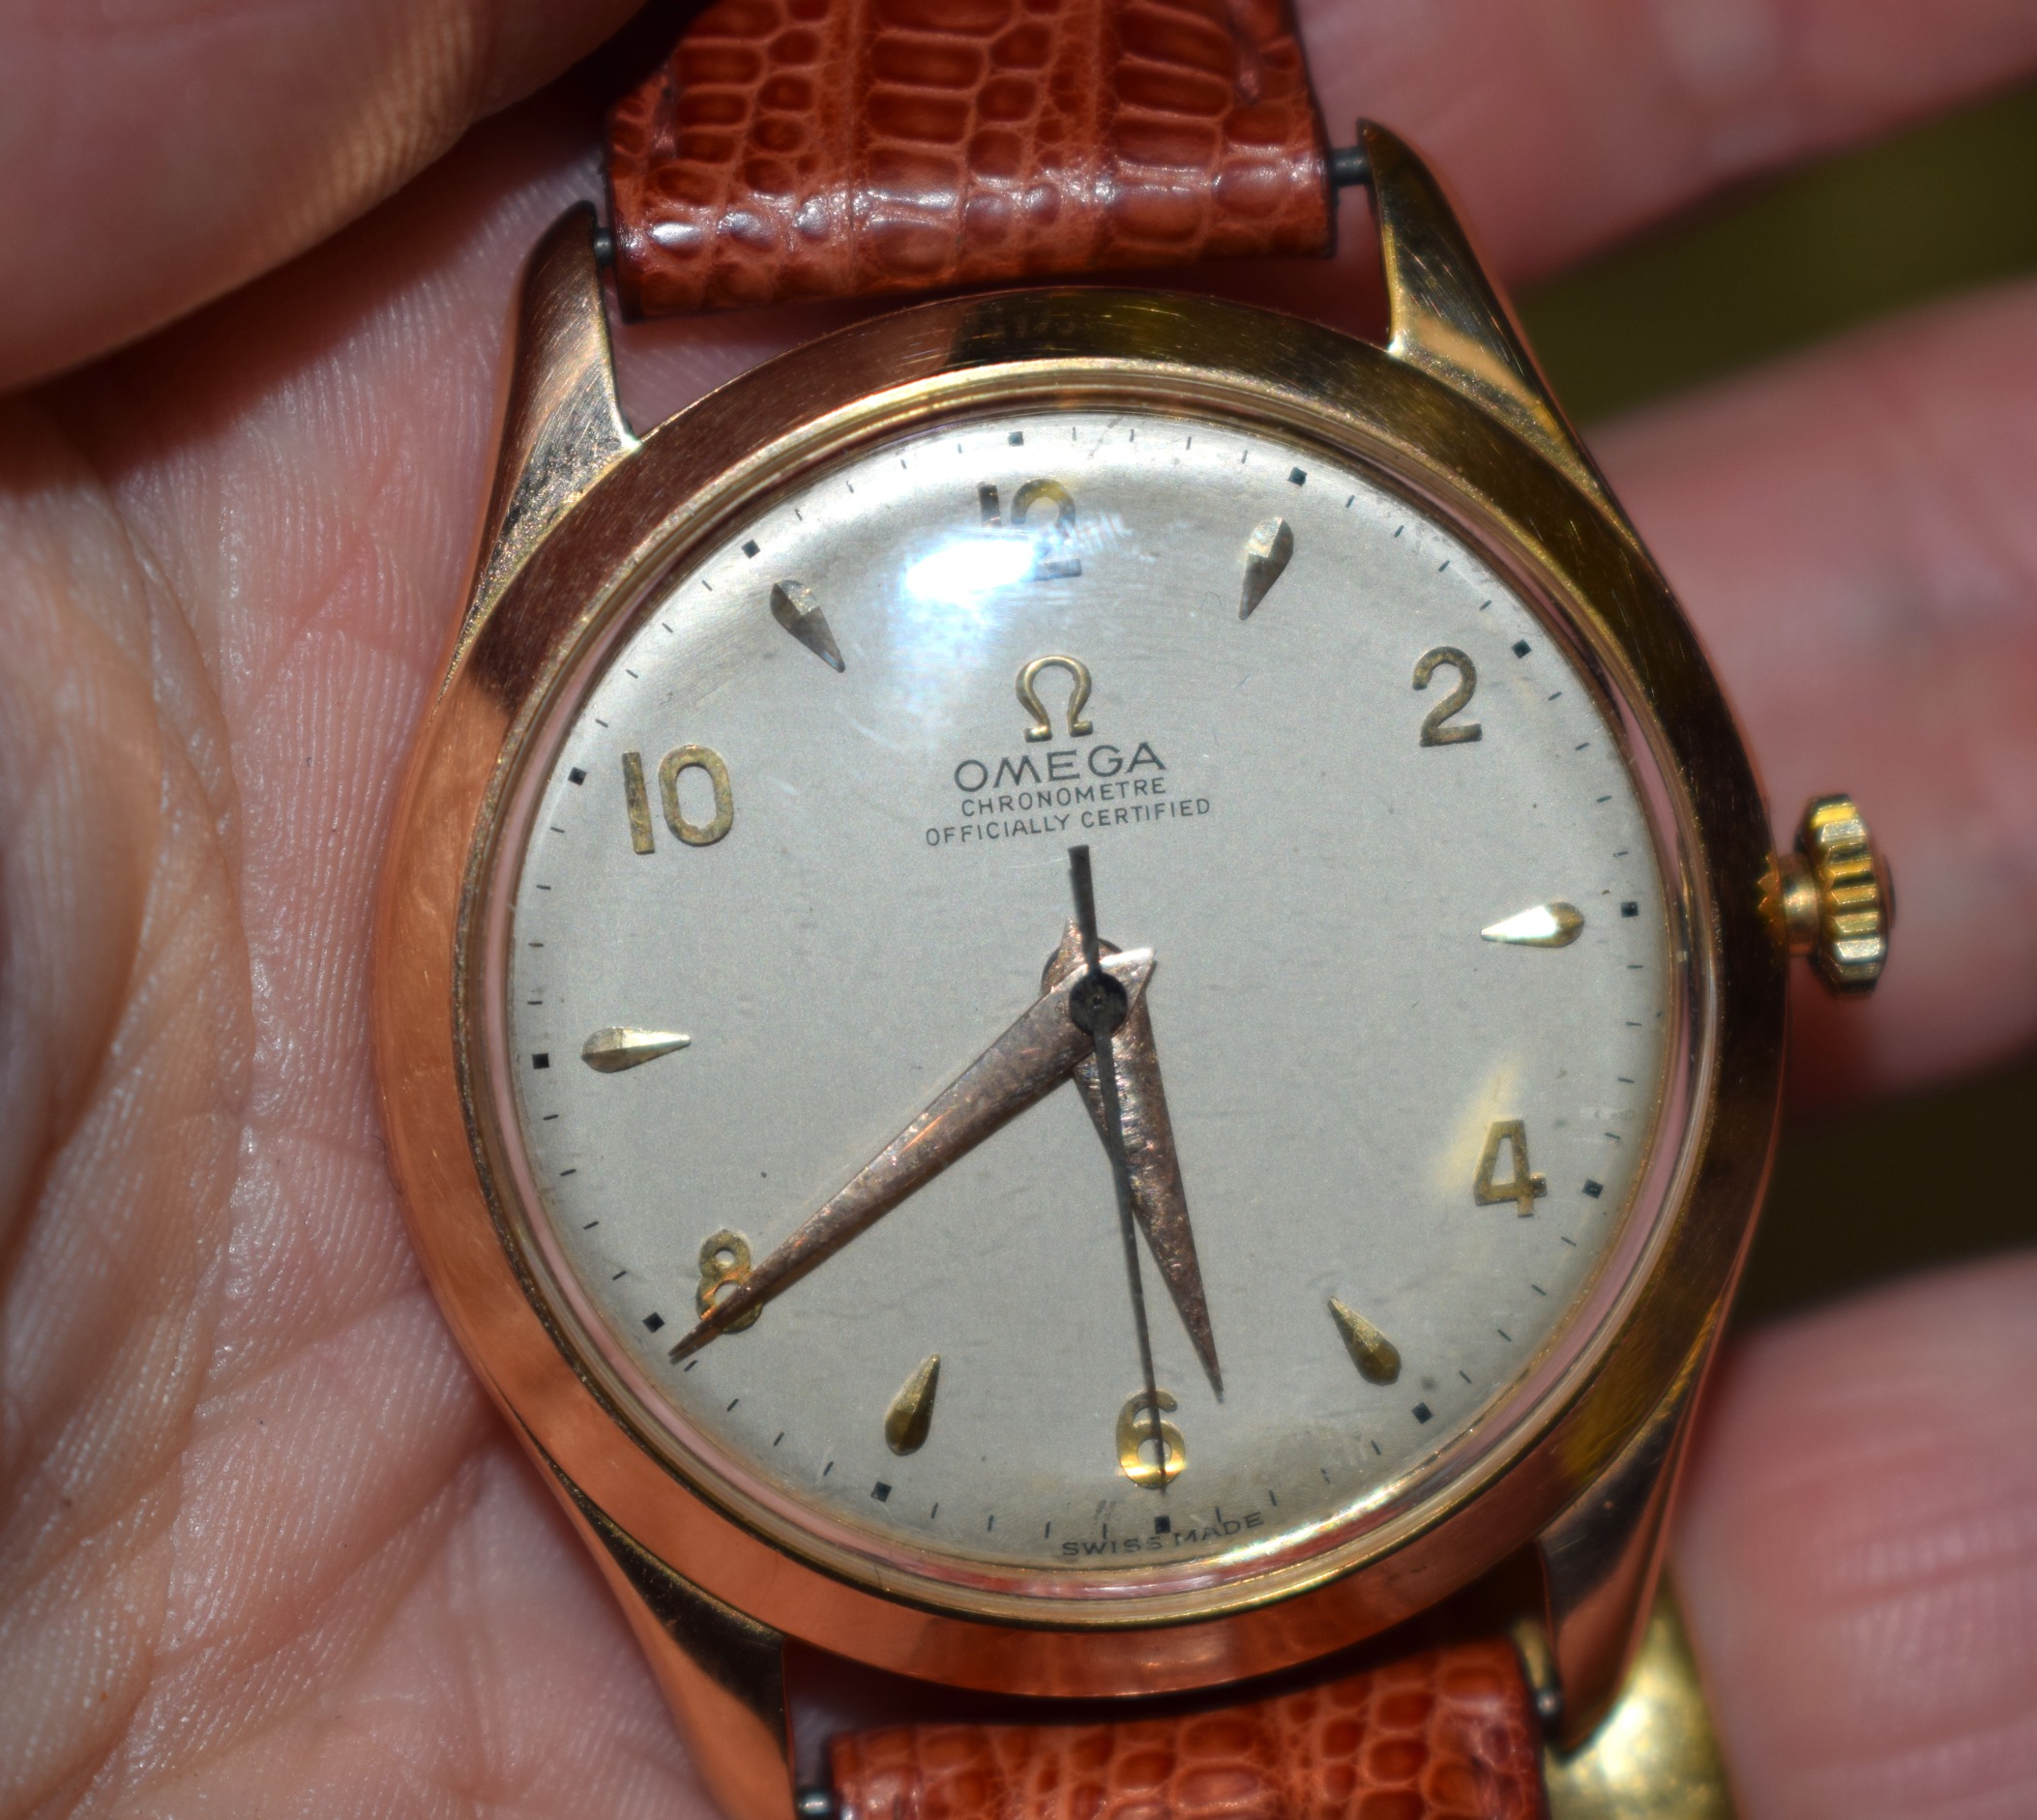 AN 18CT GOLD OMEGA CHRONOMETER WRISTWATCH with silvered dial and black numerals. Overall 39 grams. - Image 6 of 7